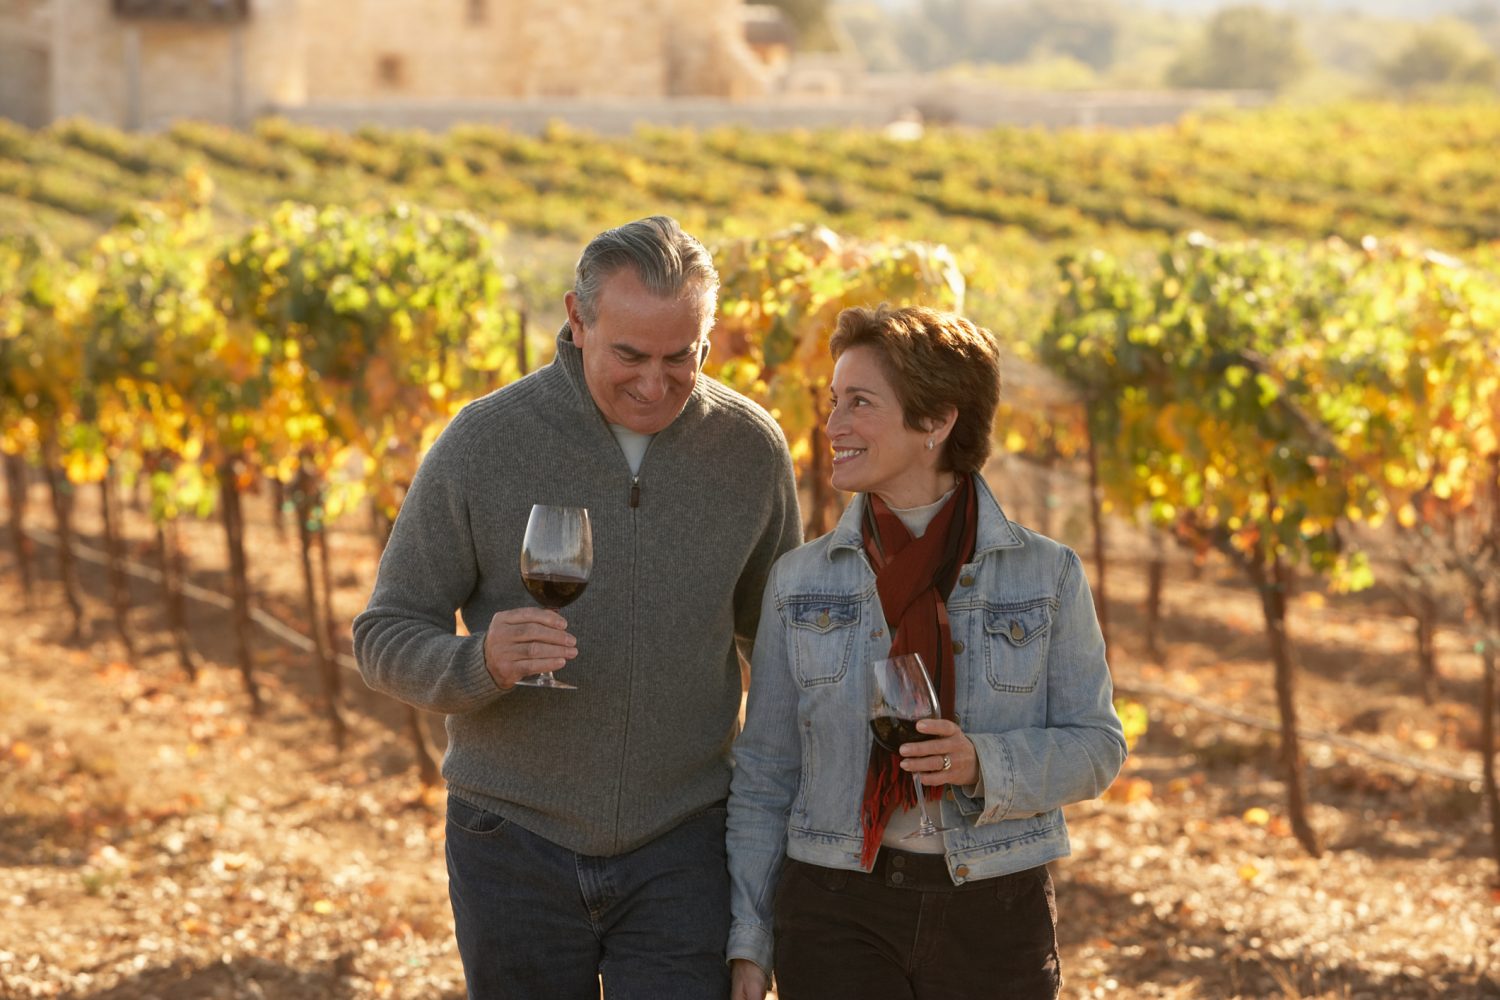 Use Our Vacation Guide to Help Plan your Trip to Napa Valley